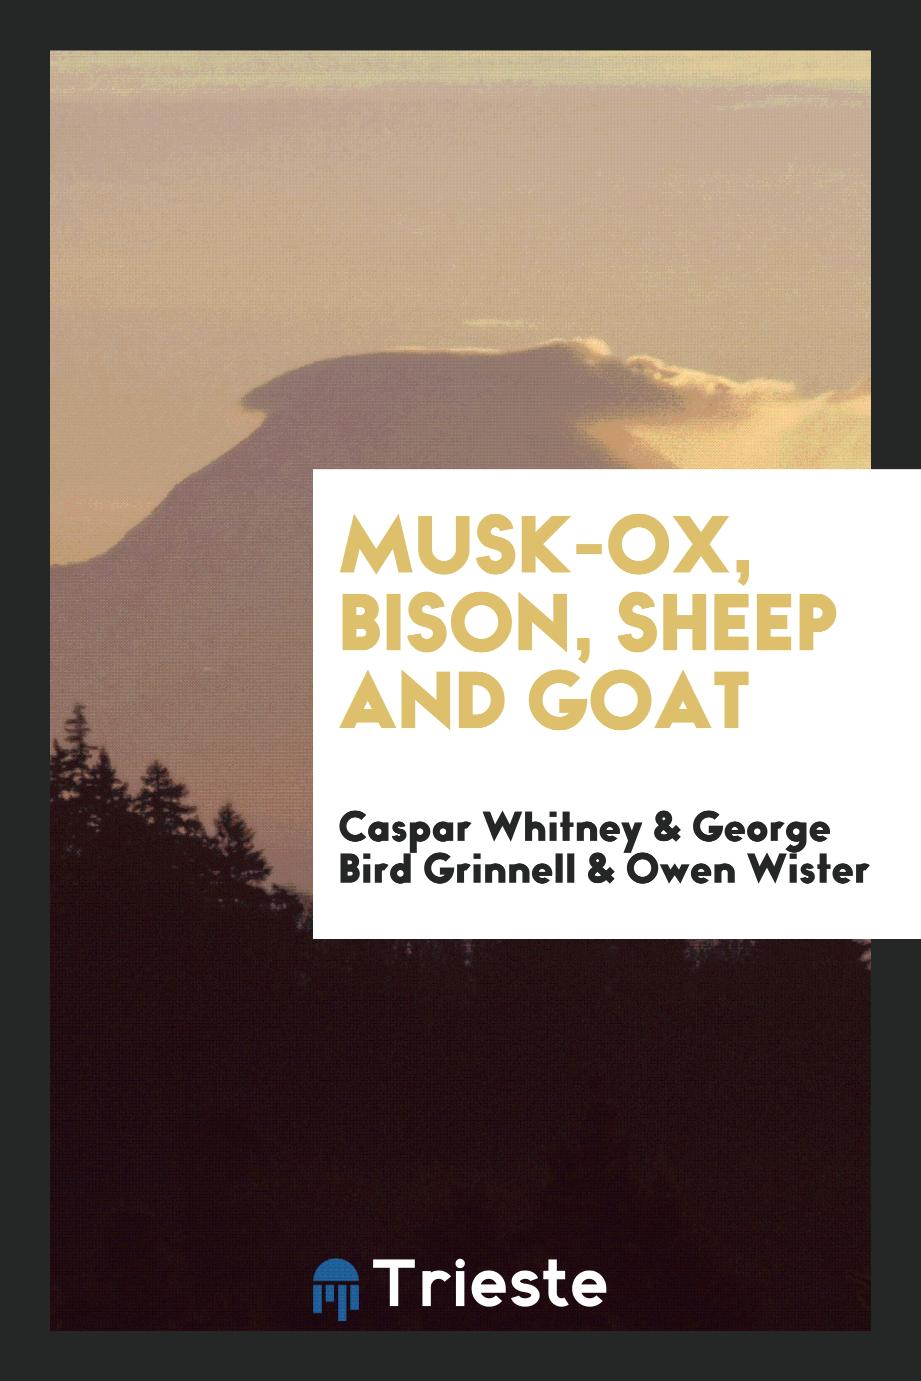 Musk-ox, bison, sheep and goat